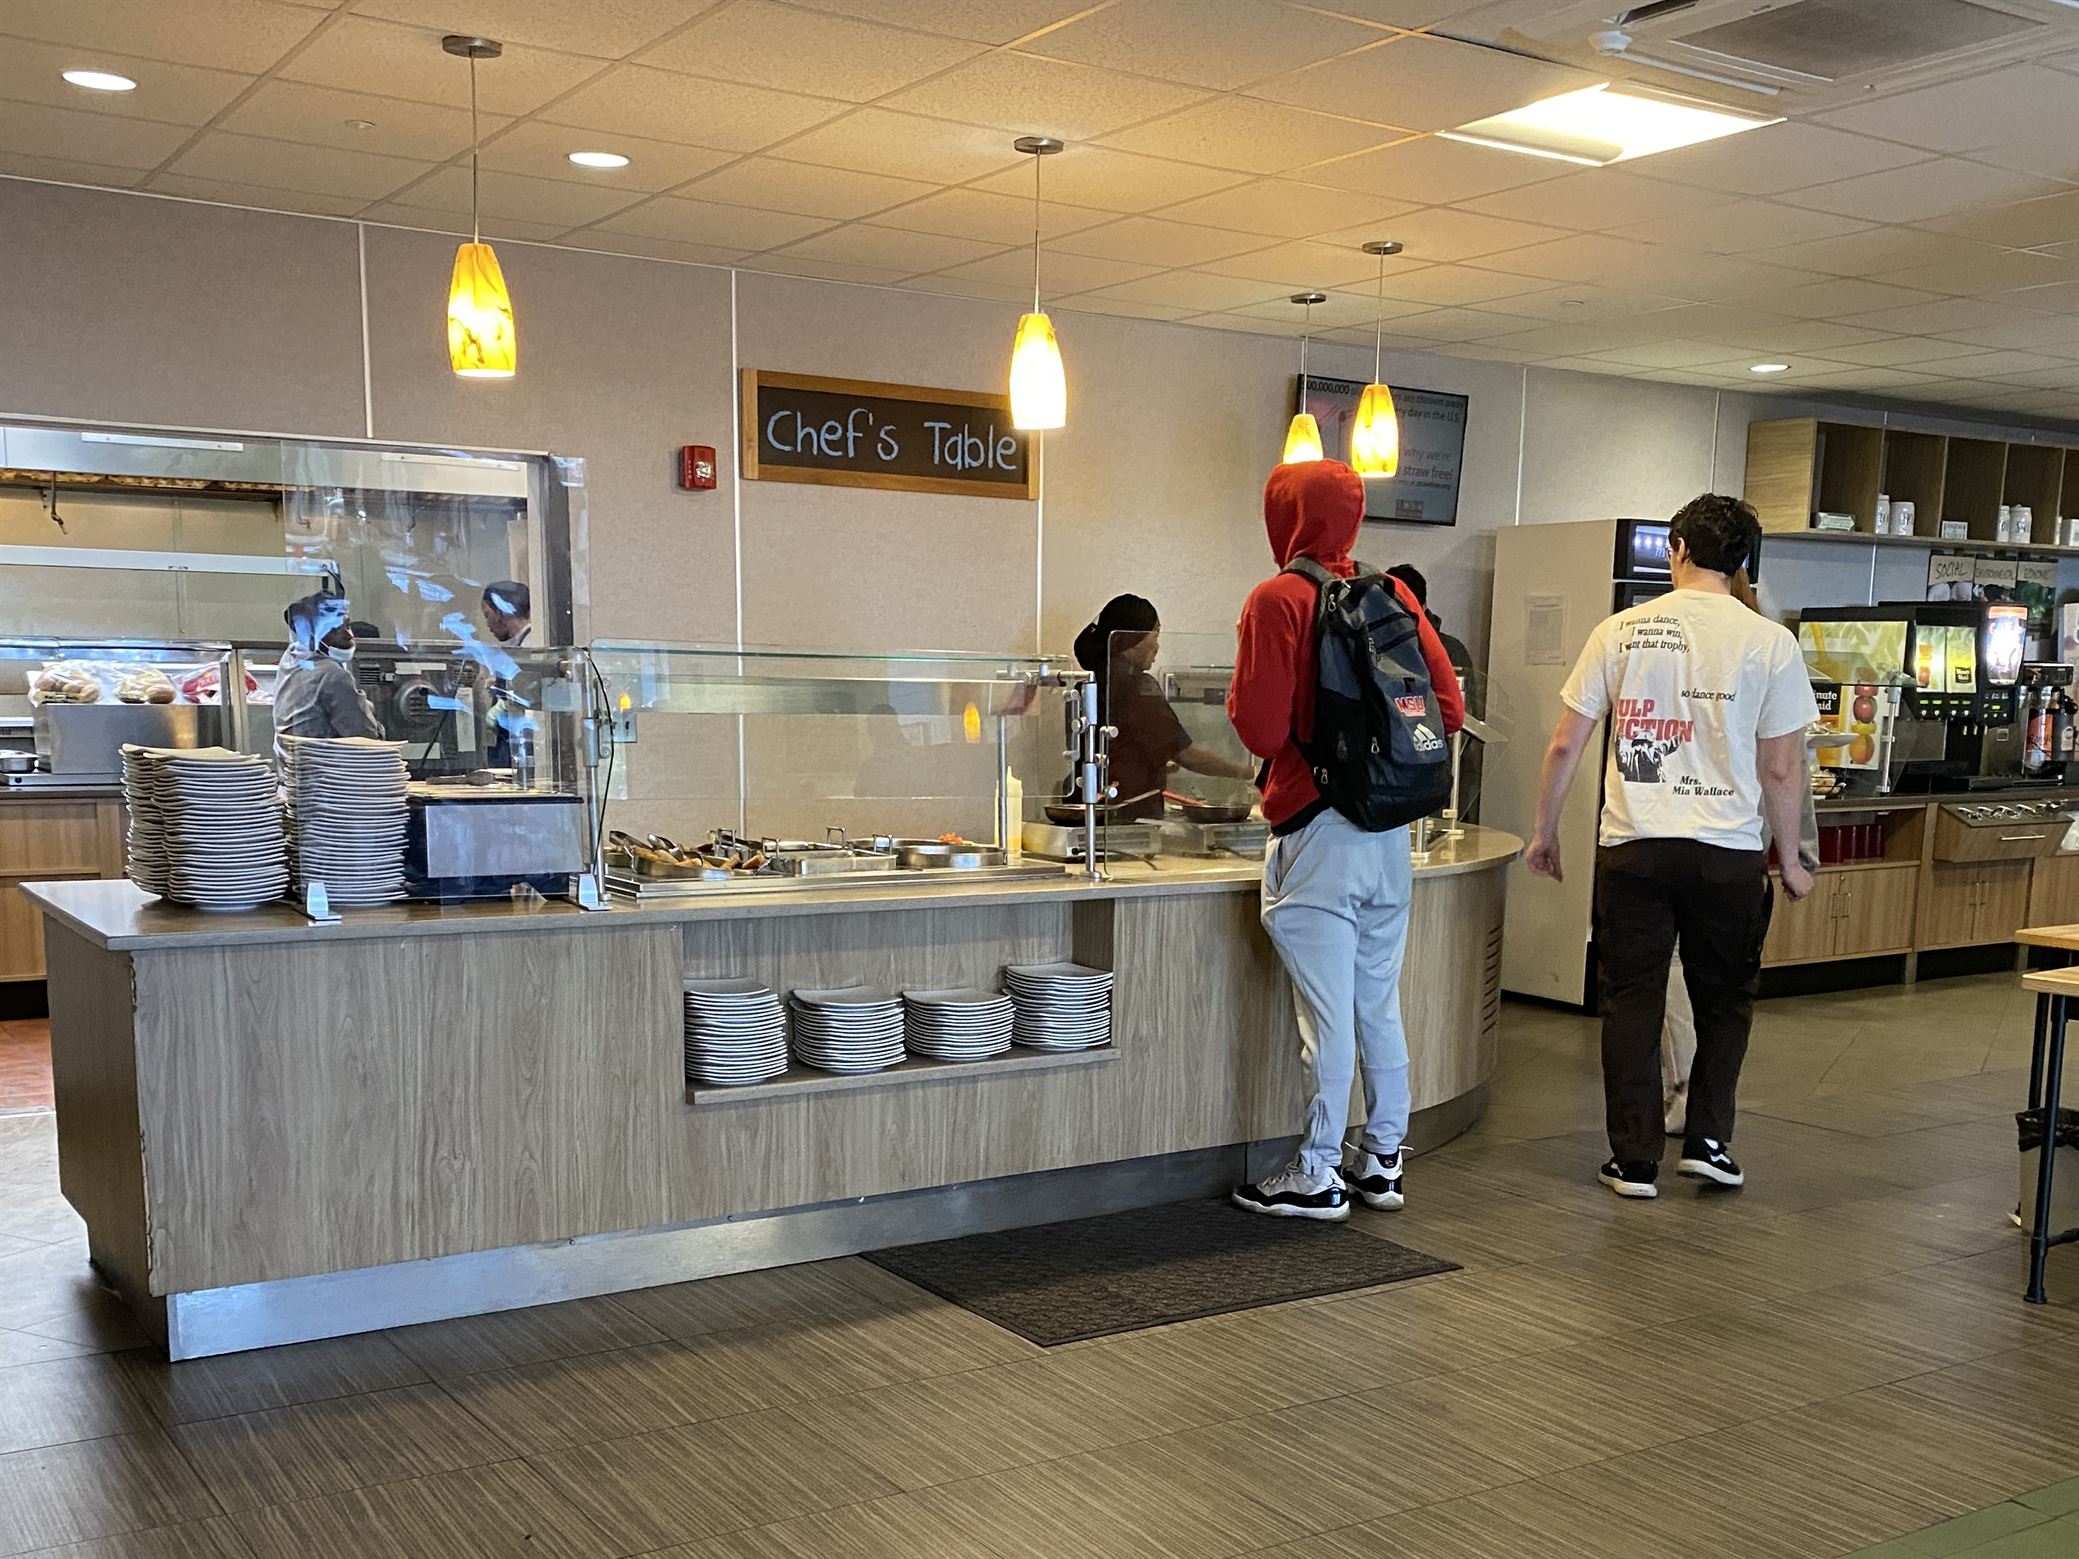 Freeman Dining Hall has great options for anyone wanting to start their day off right. Sal DiMaggio | The Montclarion